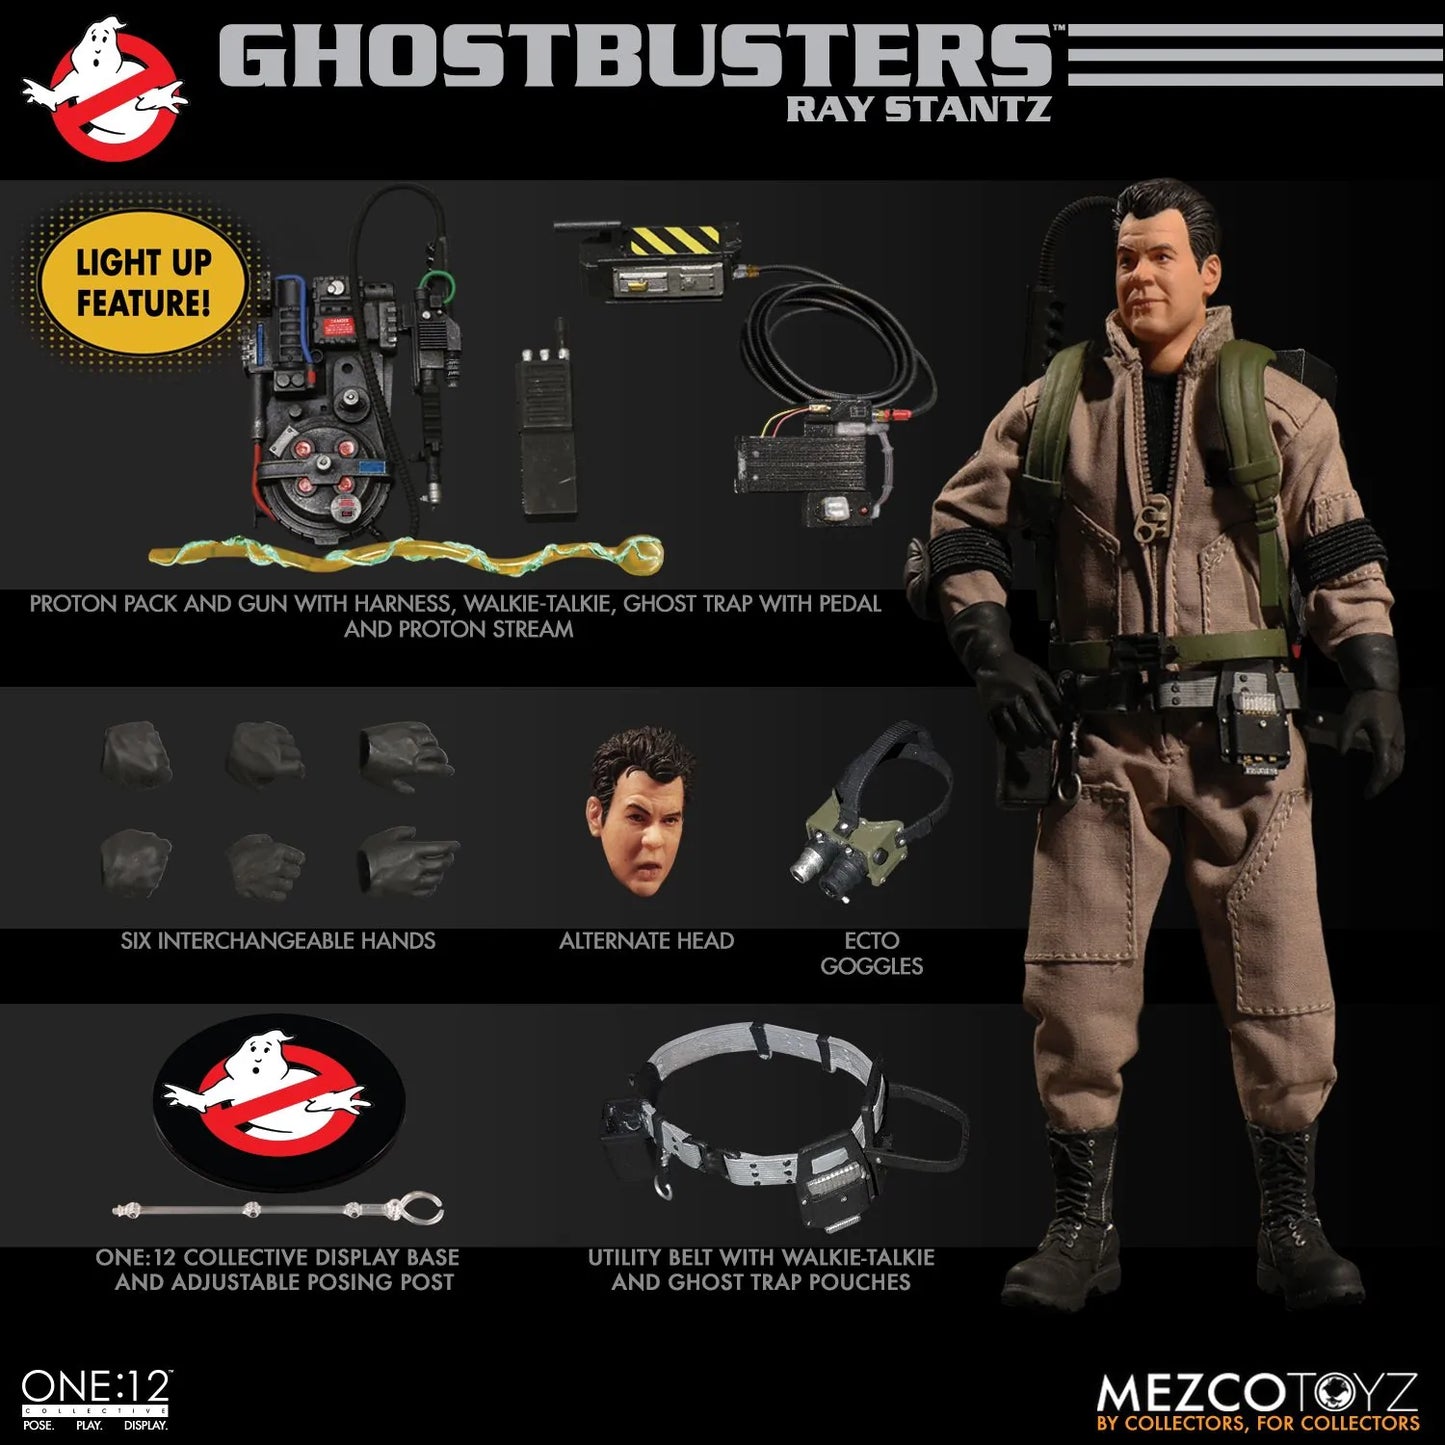 Ghostbusters One:12 Deluxe Set - Ghostbusters Mezco Toyz